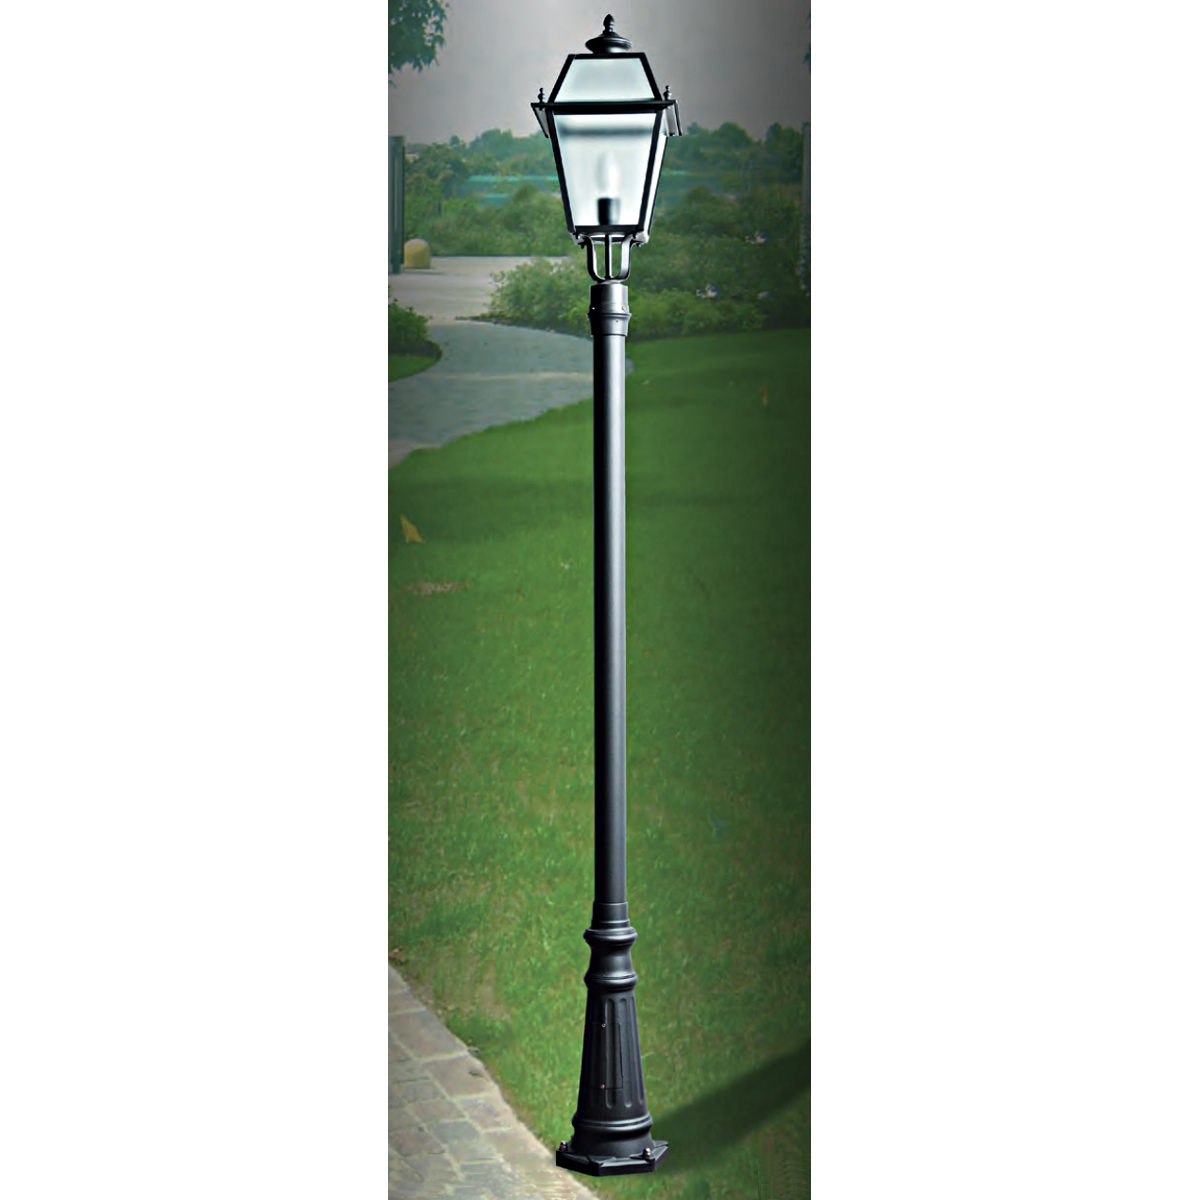 Italian Lamp Post for Gardens and Parks